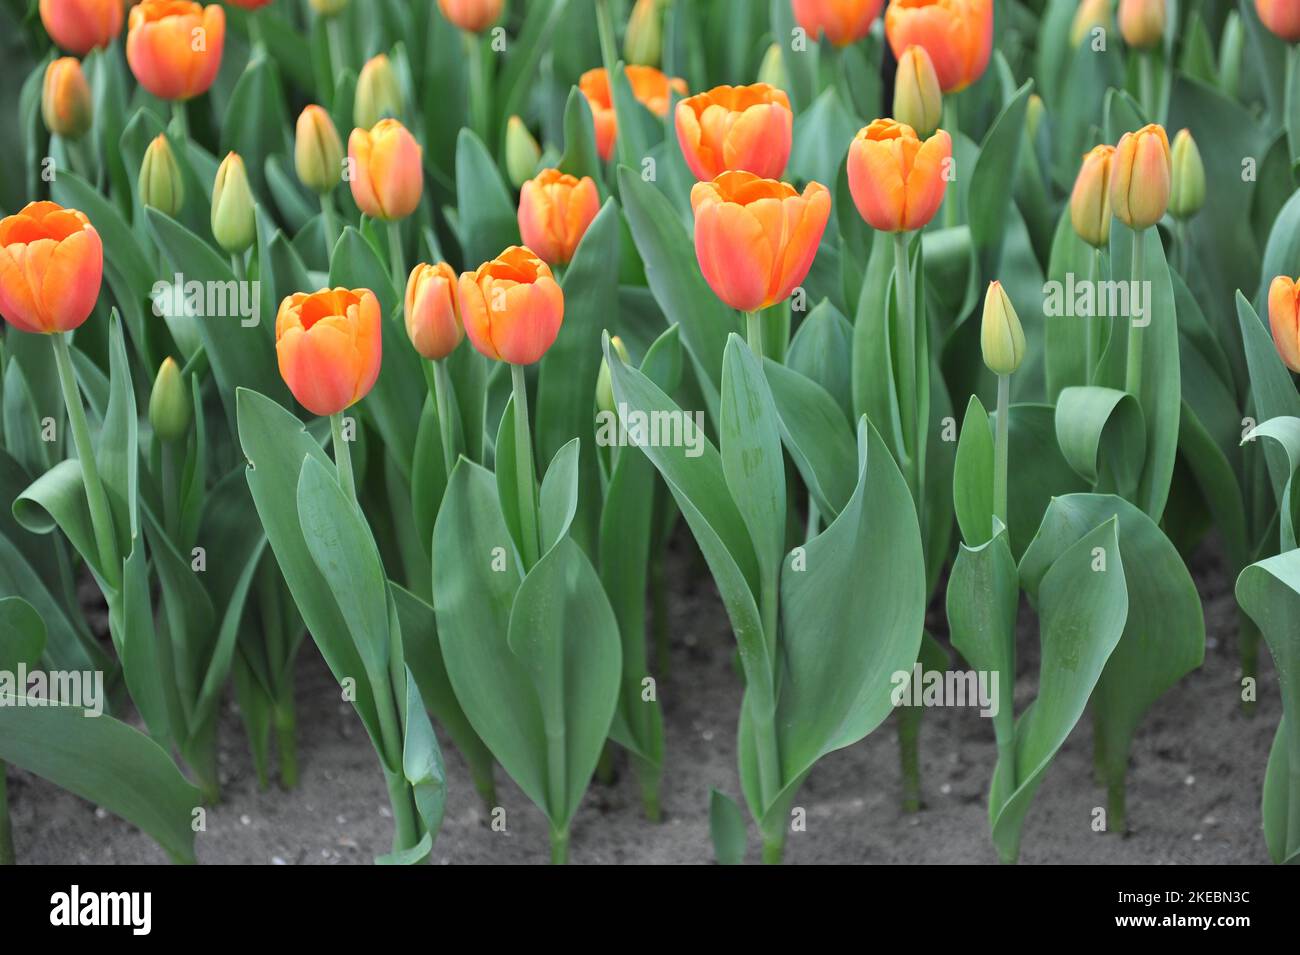 Orange Triumph tulips (Tulipa) Time Out bloom in a garden in March Stock Photo